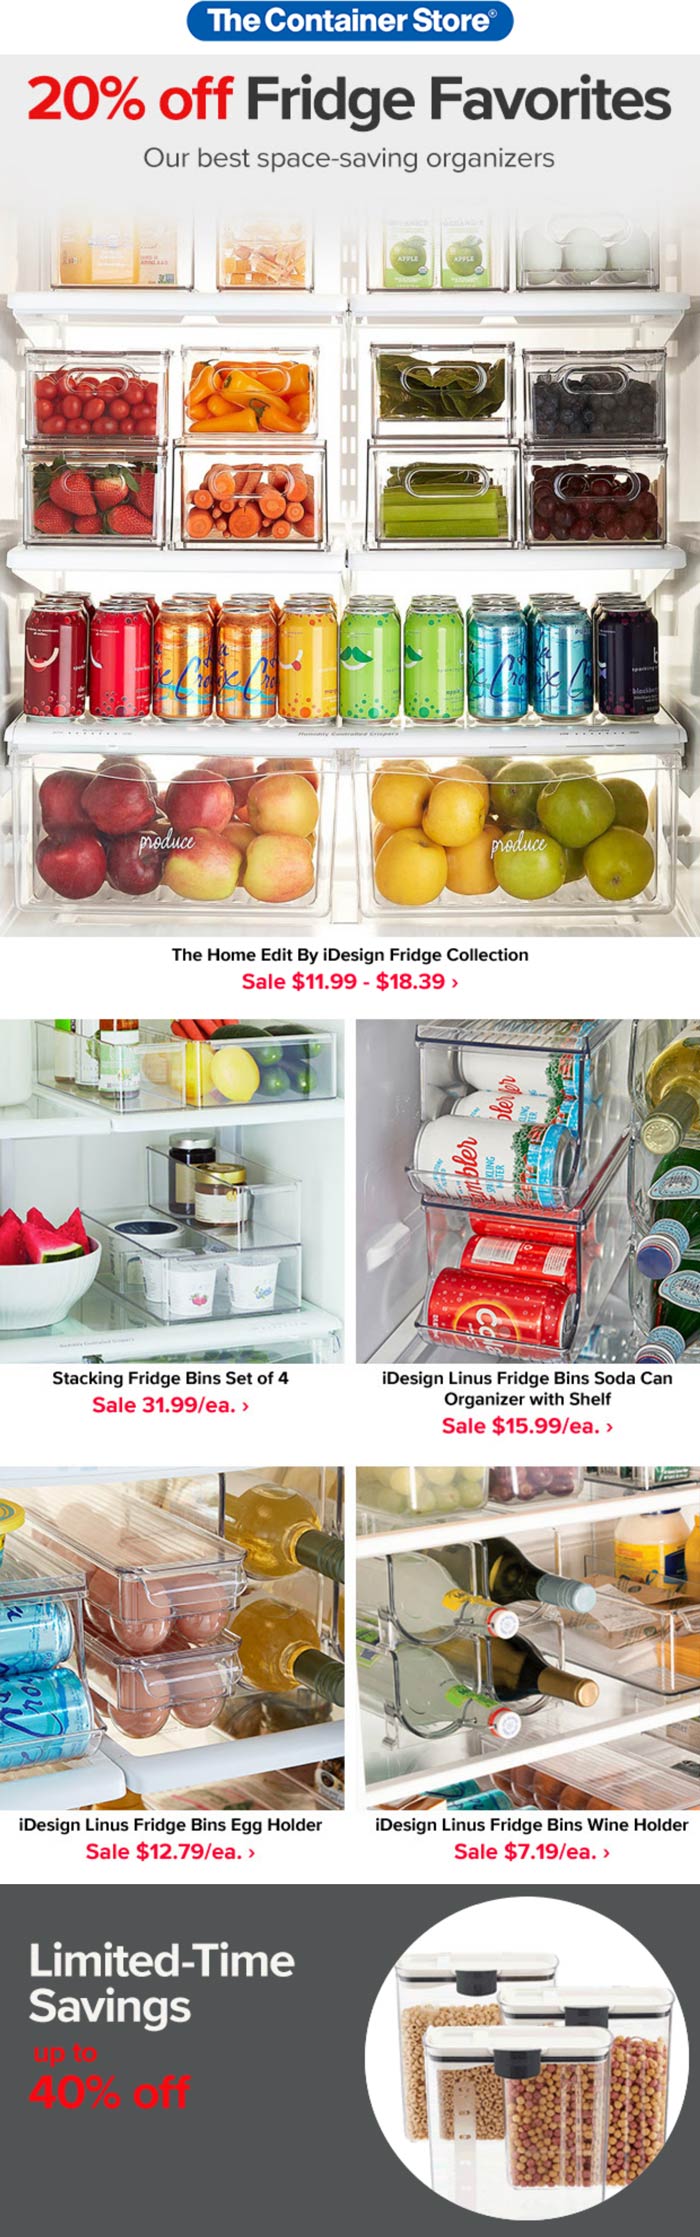 may-2021-20-off-fridge-organizers-more-at-the-container-store